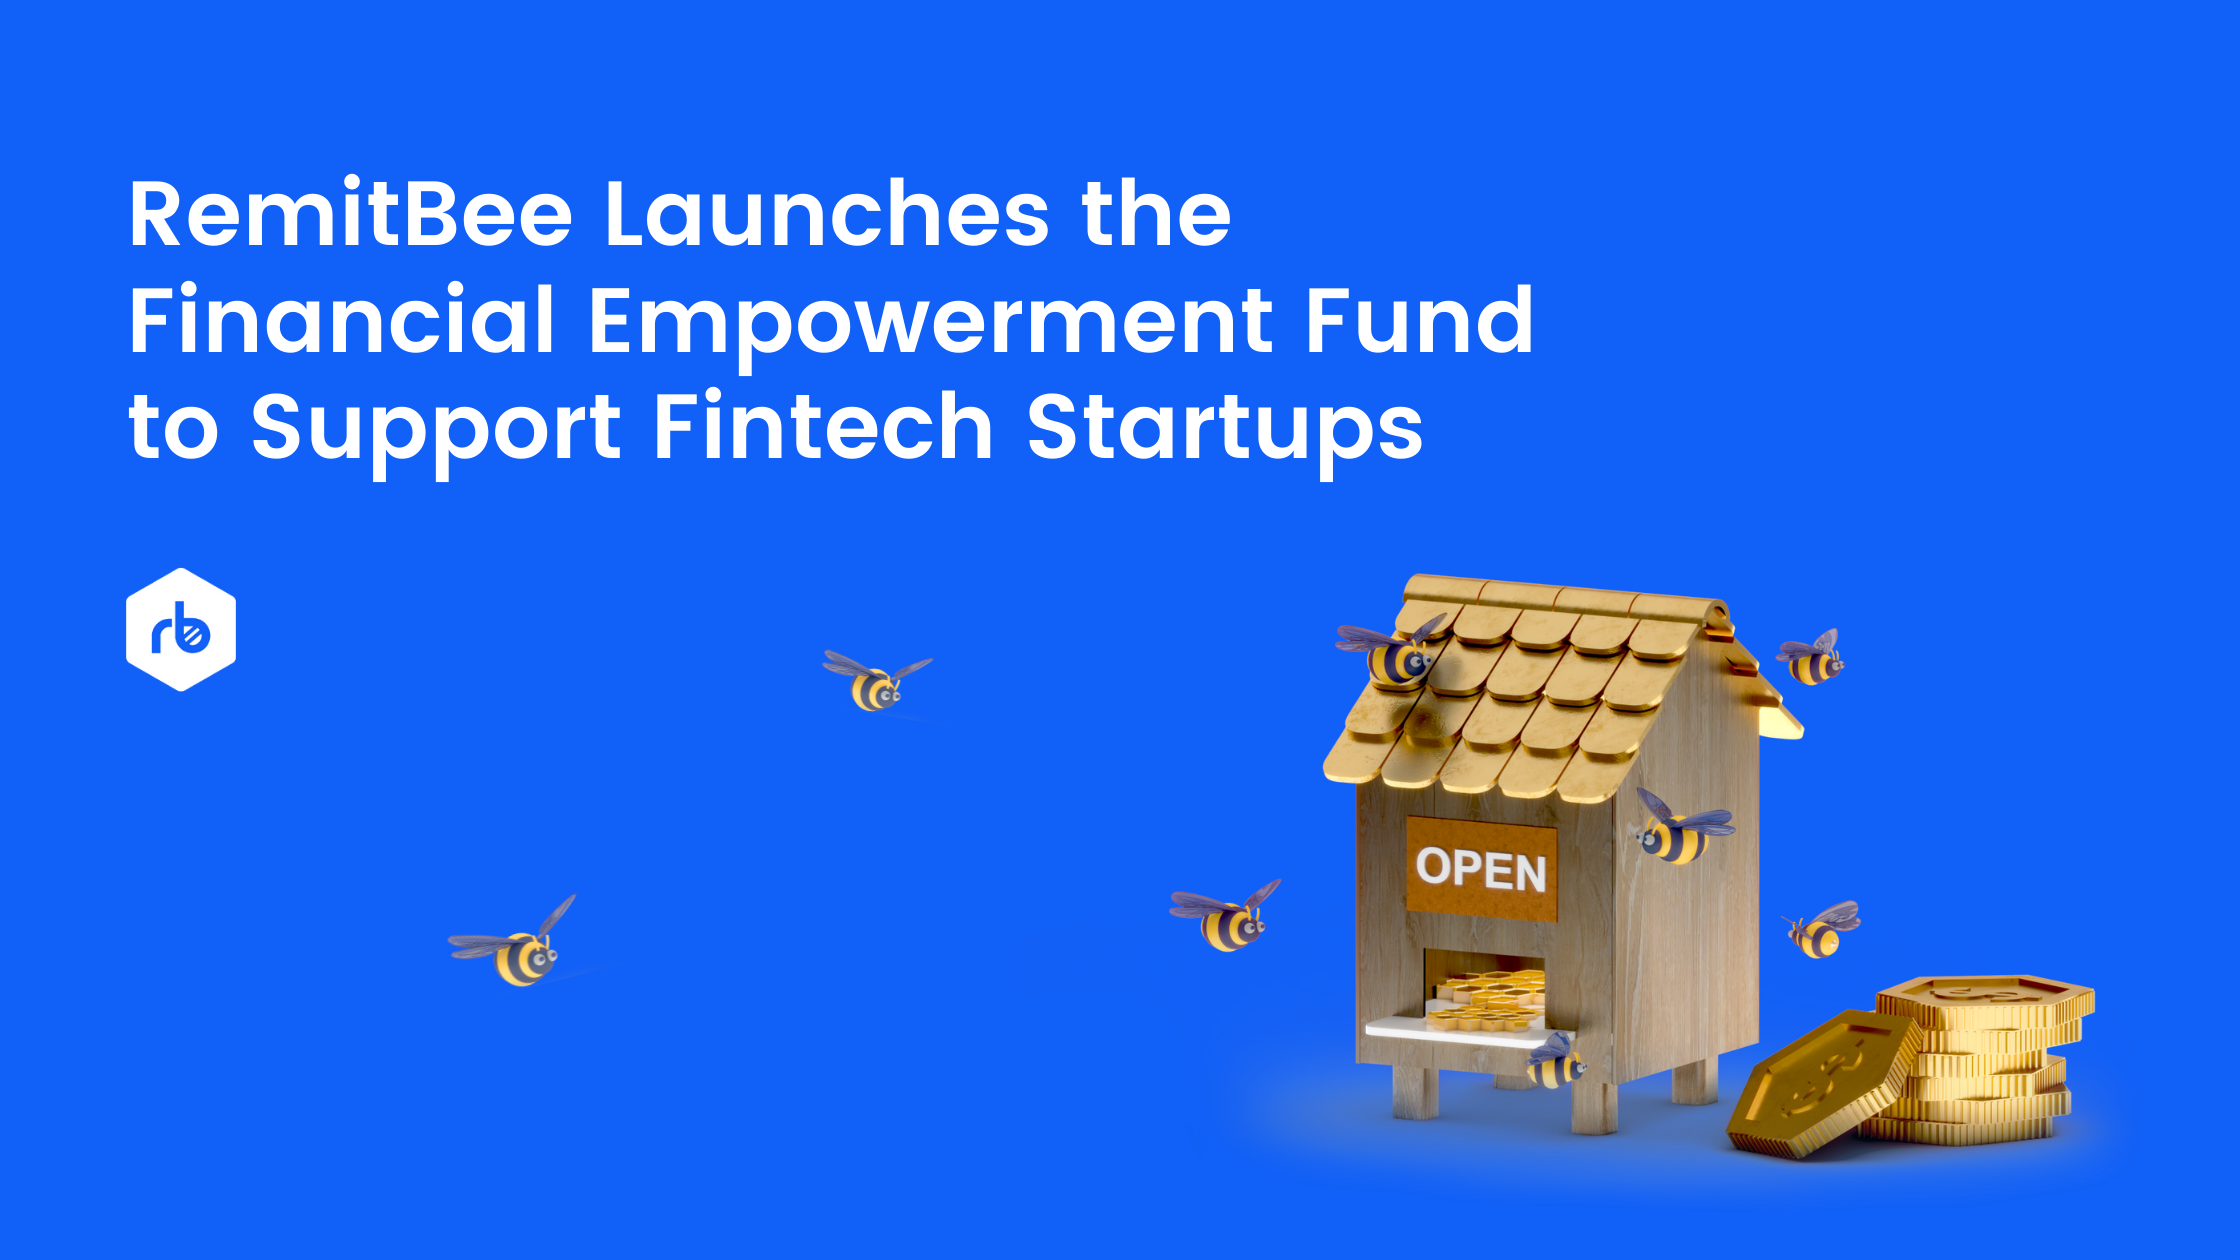 RemitBee Launches the Financial Empowerment Fund to Support Fintech Startups 